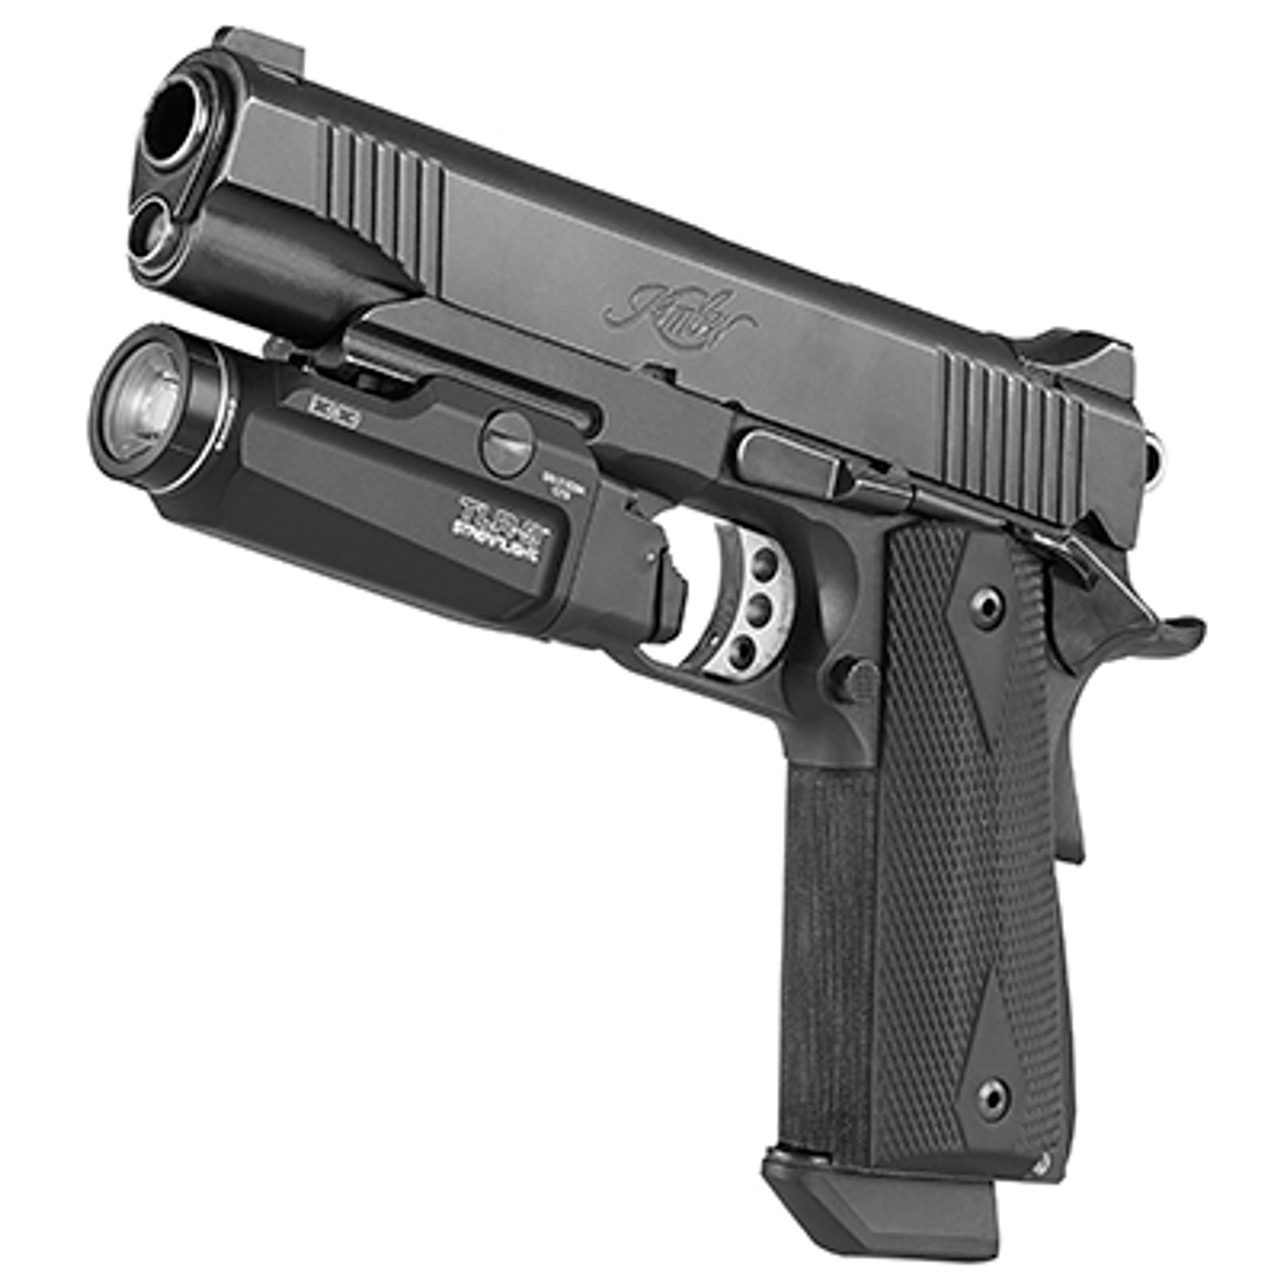 Streamlight - TLR-9™ GUN LIGHT WITH AMBIDEXTROUS REAR SWITCH OPTIONS